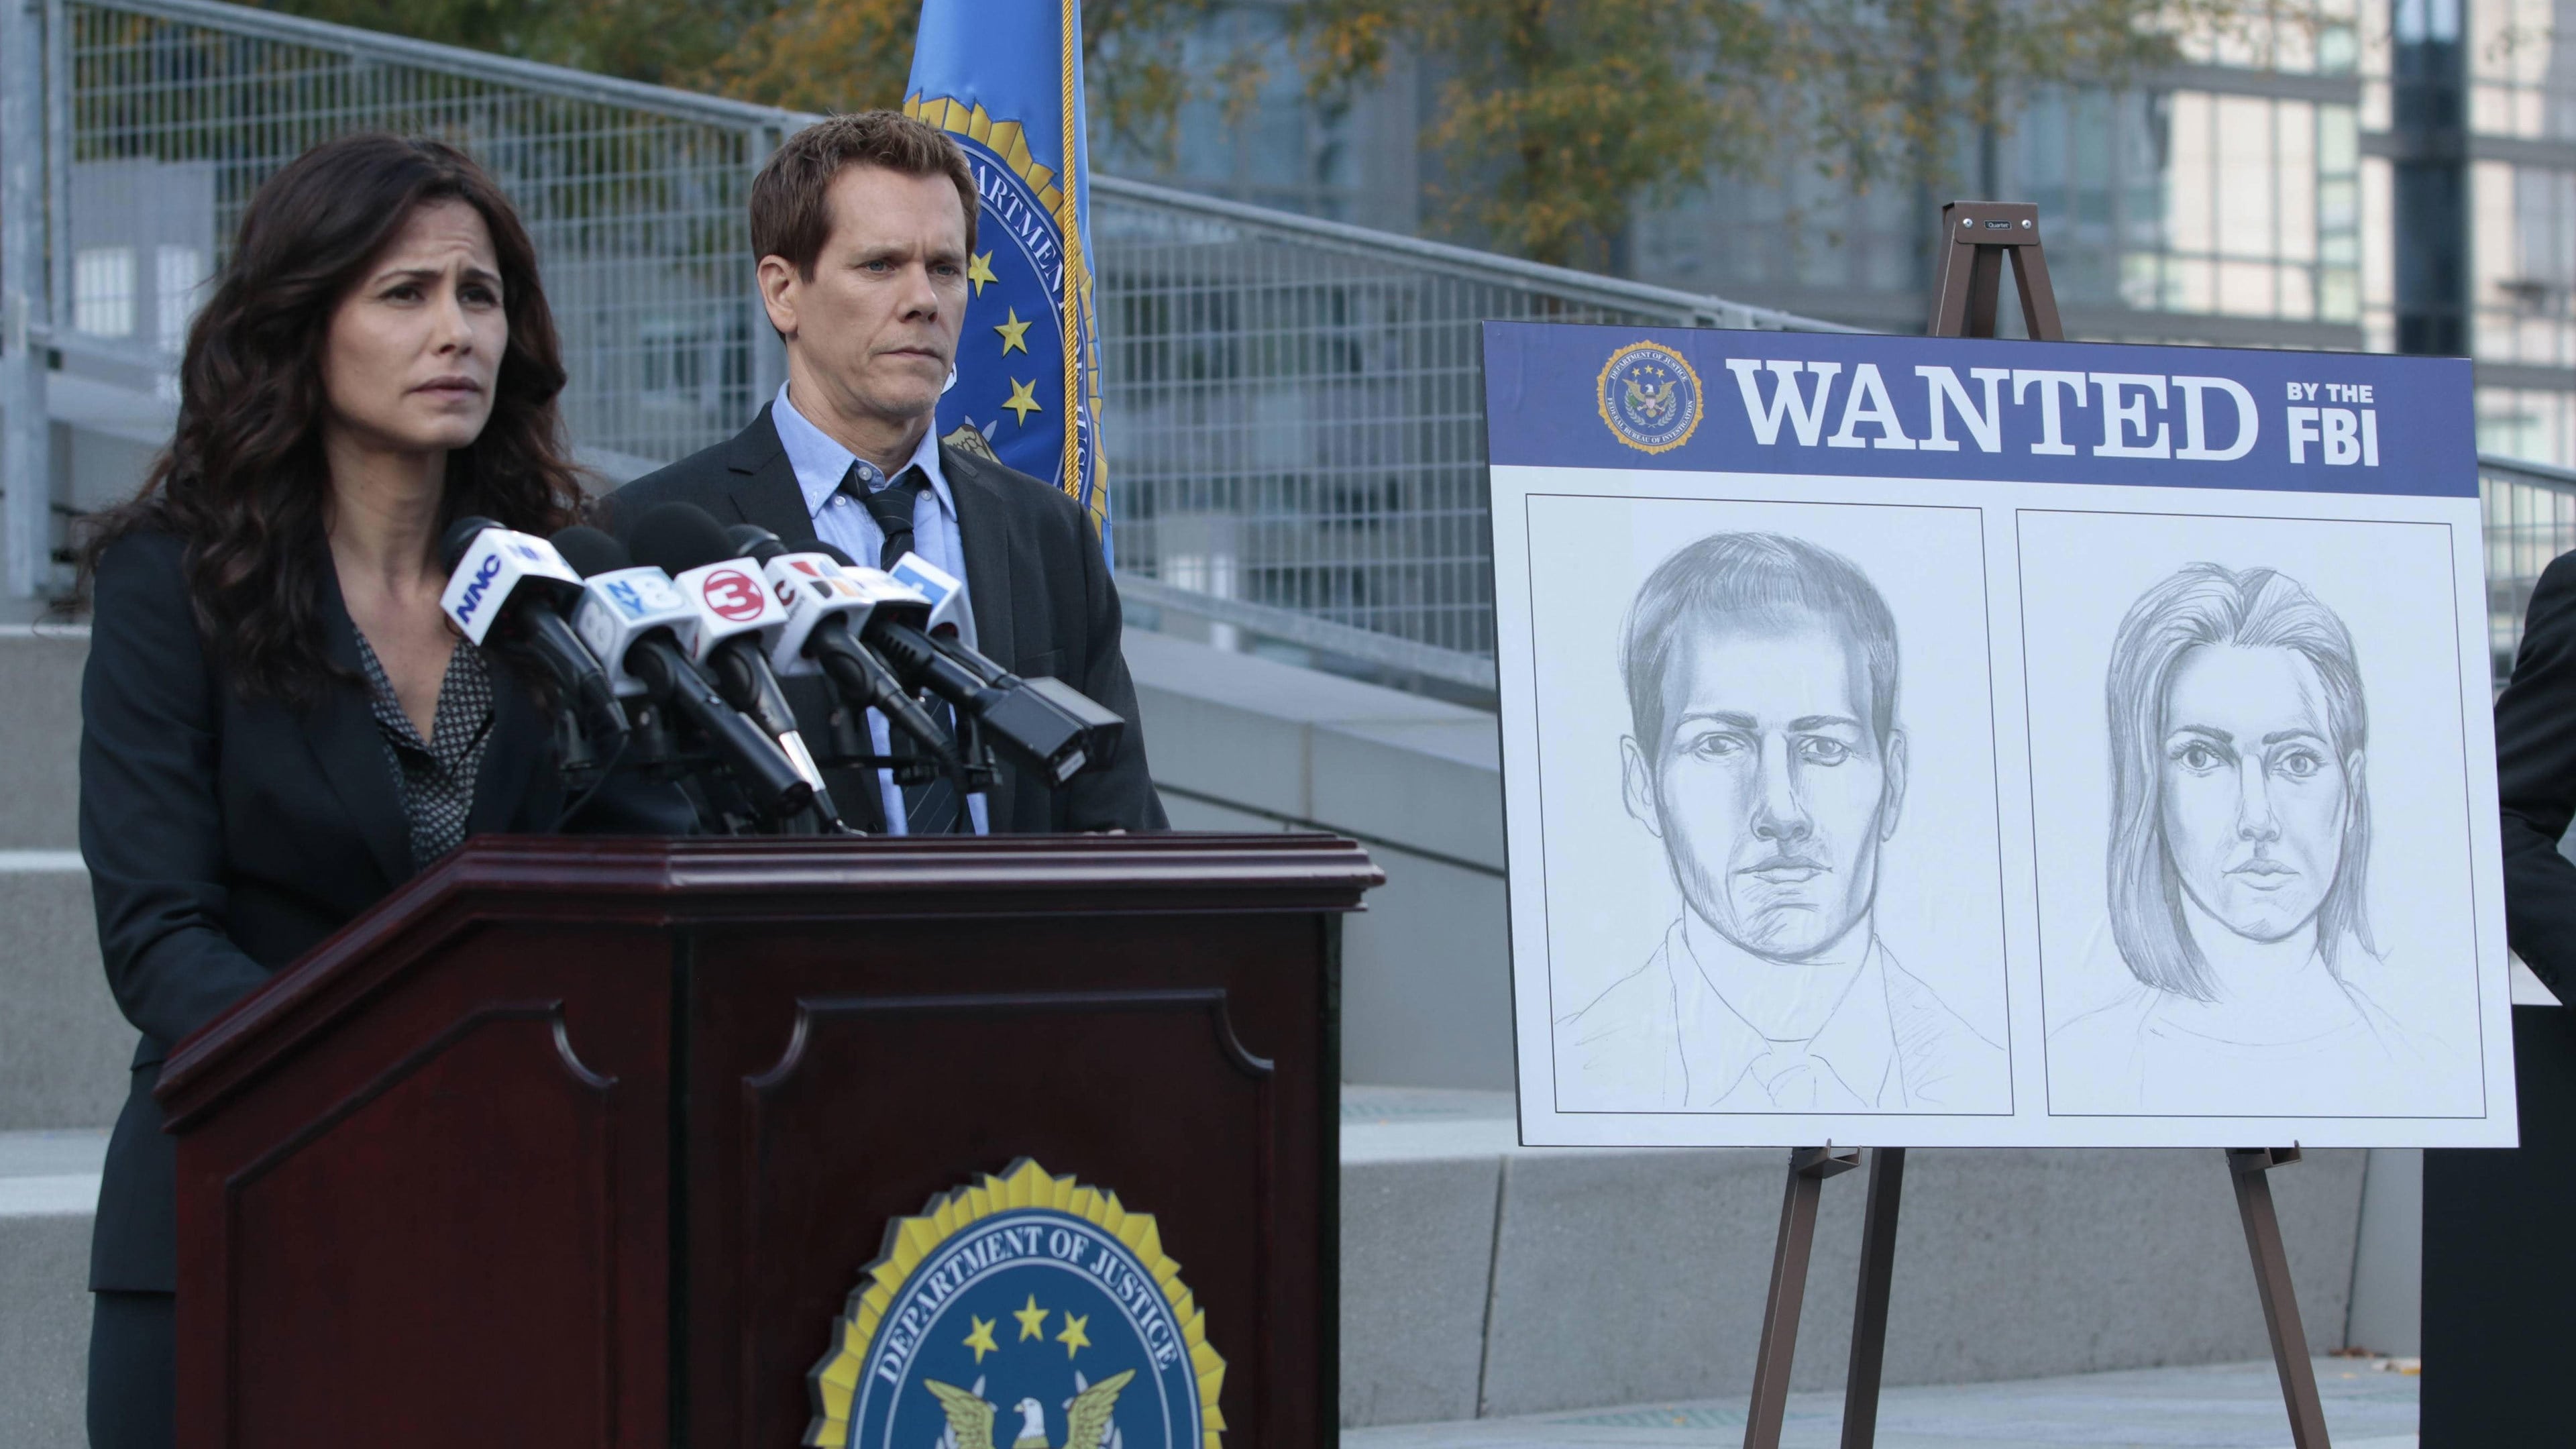 Image The Following (2013) 1